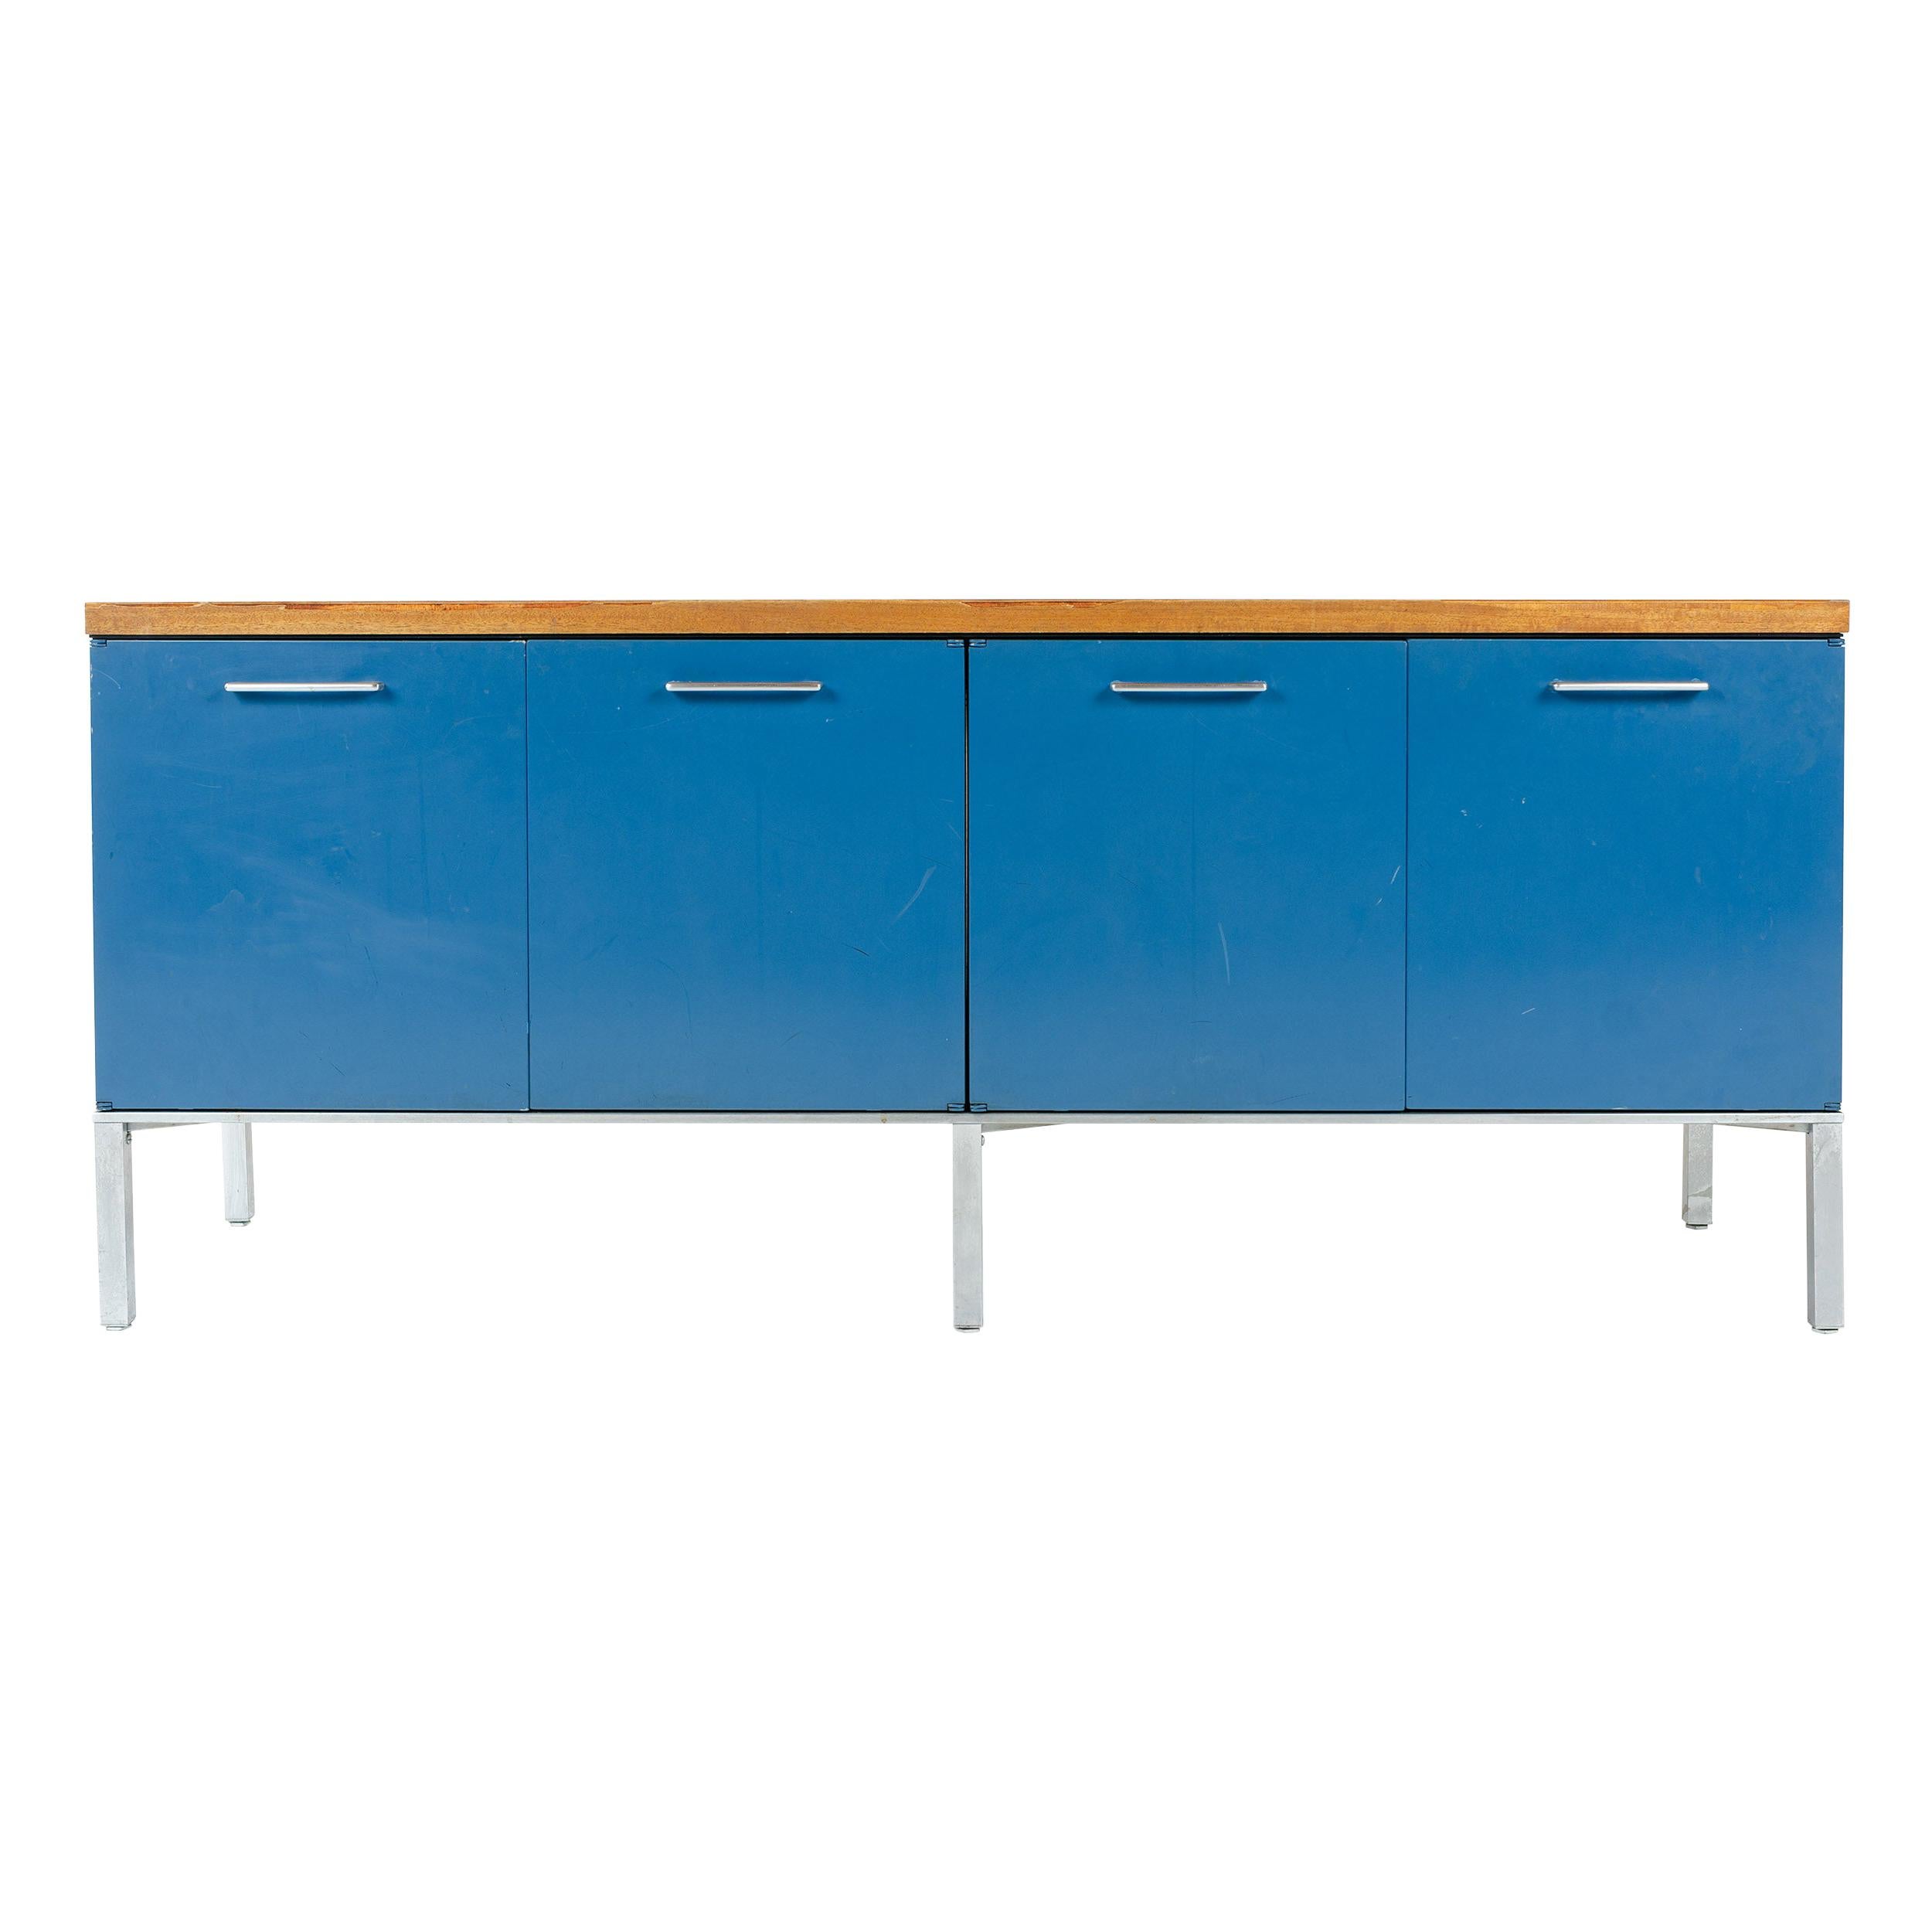 1950s American Steel and Walnut Credenza by General Fireproofing